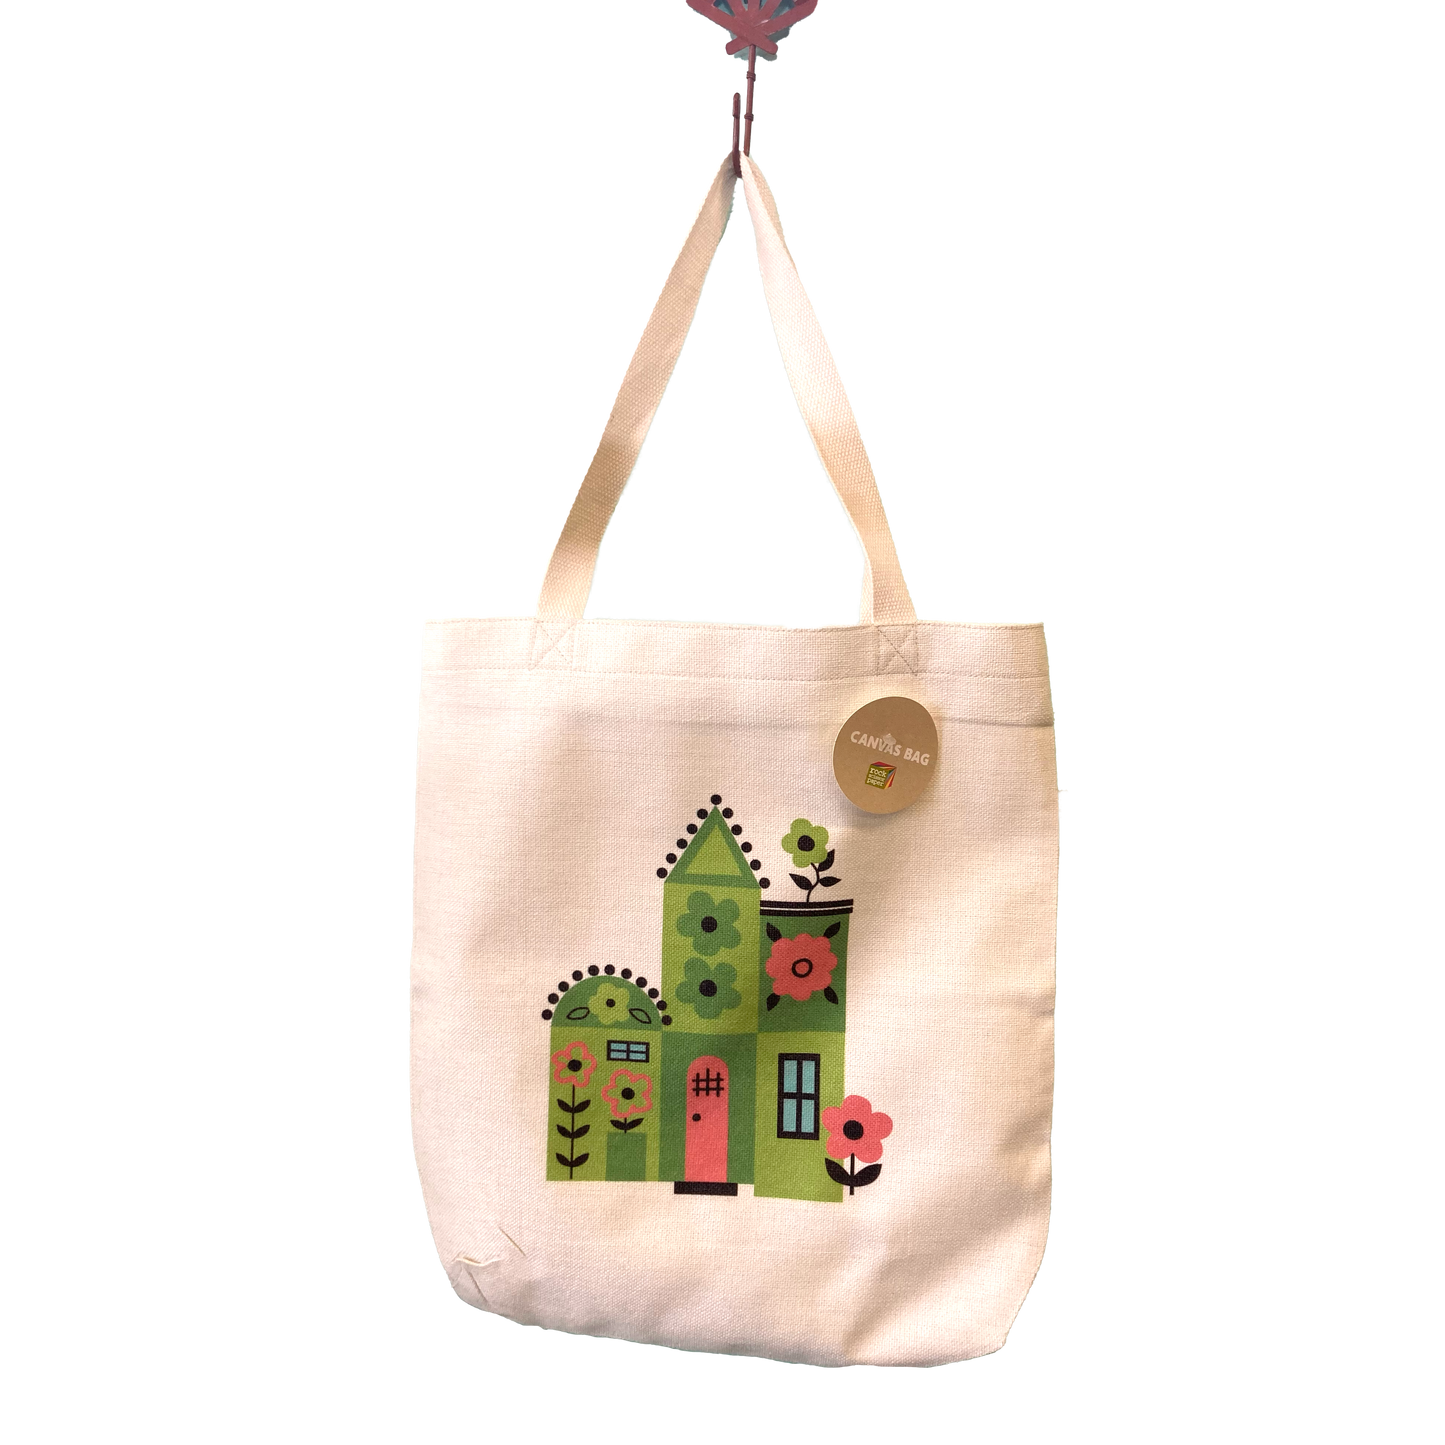 Flower House Tote